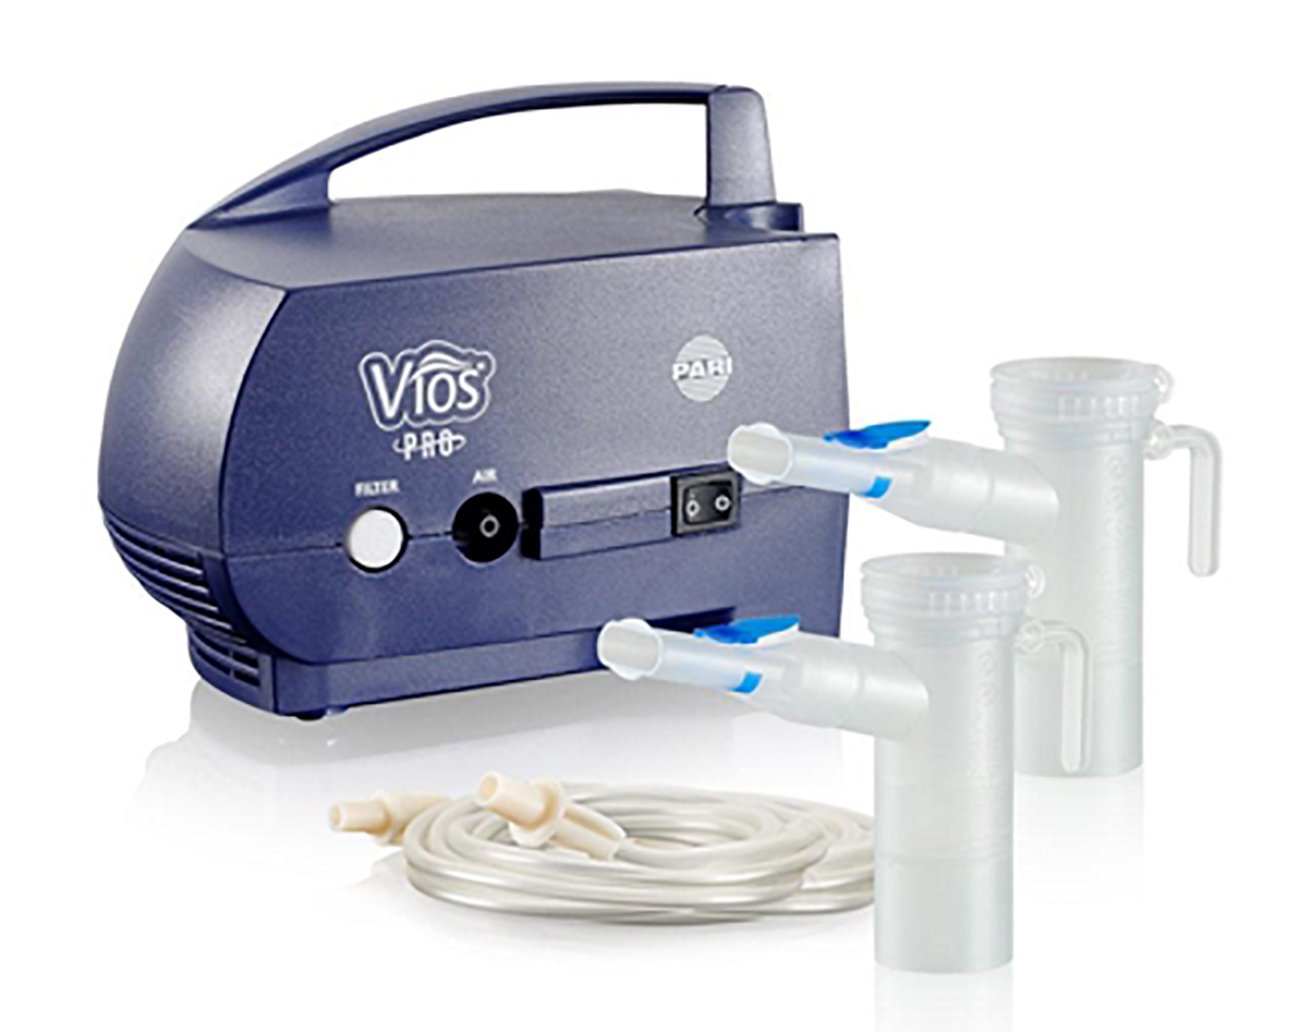 Vios Pro Aerosol Delivery System with LC Plus Nebulizer